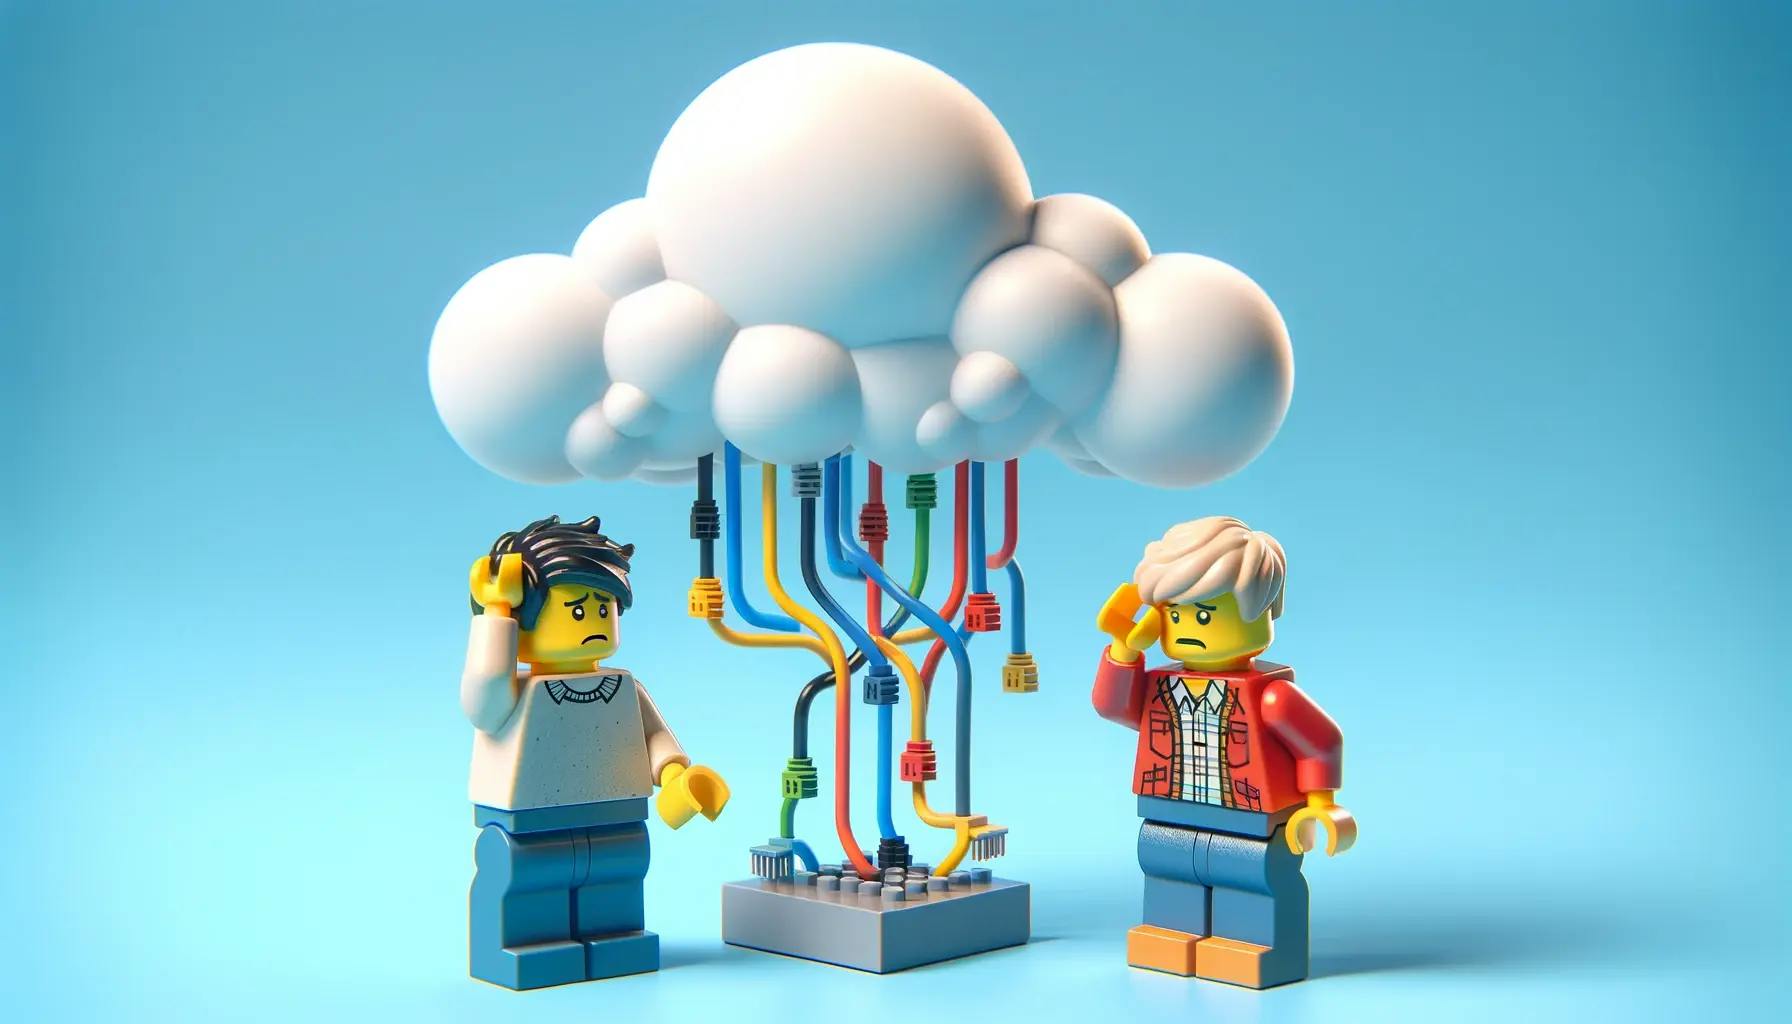 The image depicts a Lego man, standing and scratching his head with a puzzled expression. He is looking at a cloud network, and is very confused.